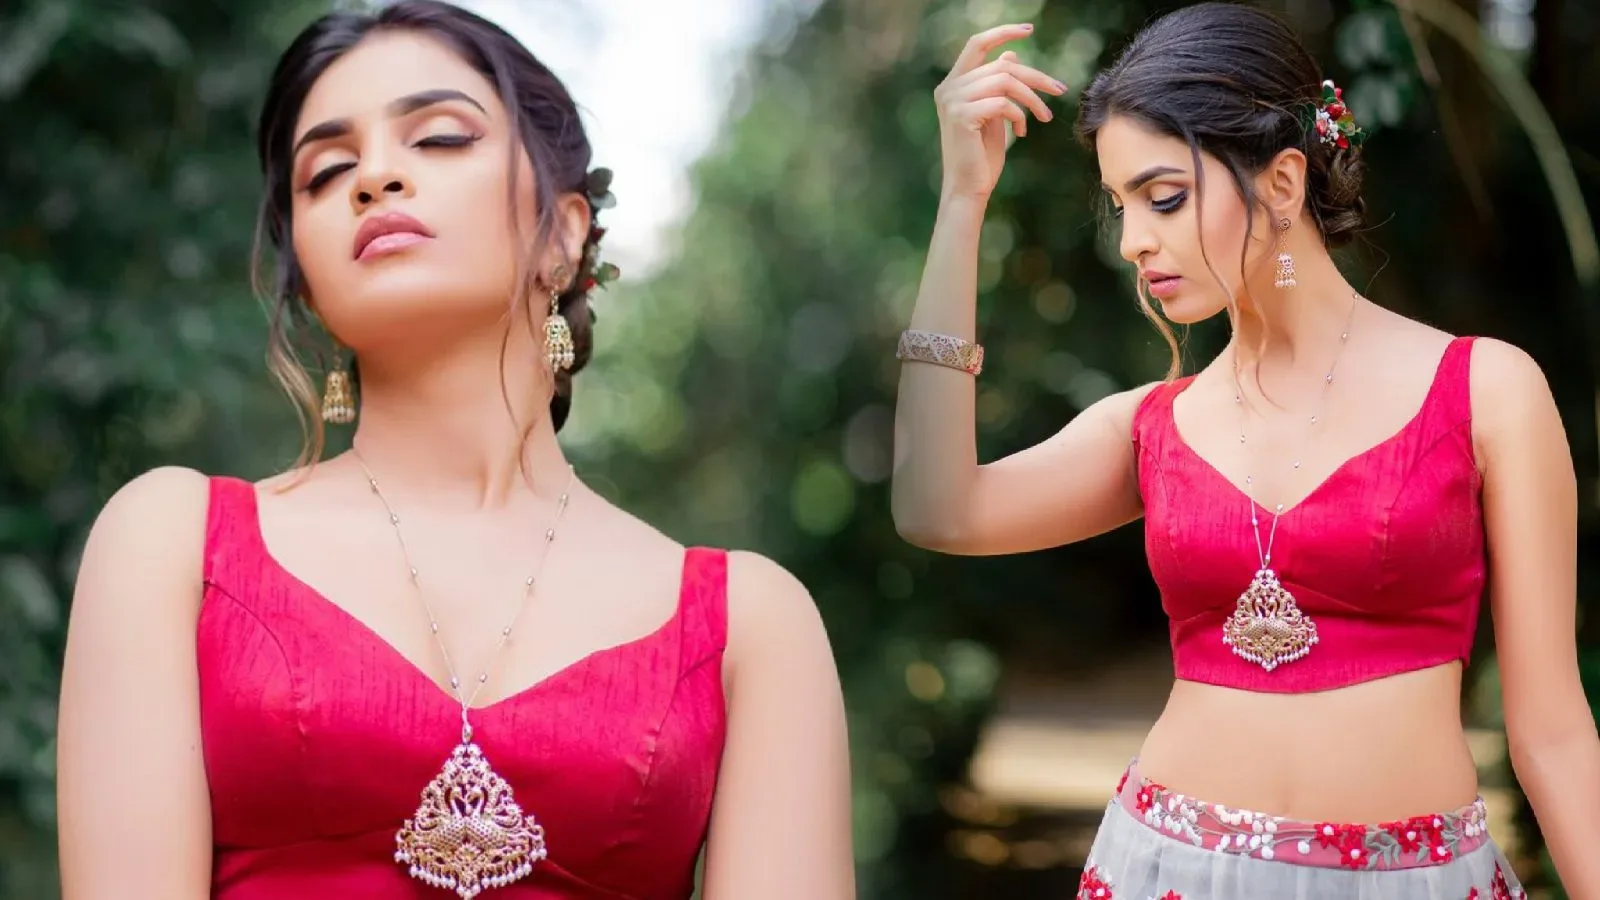 The model Eishie Rathnayake looks gorgeous in Red Blouse